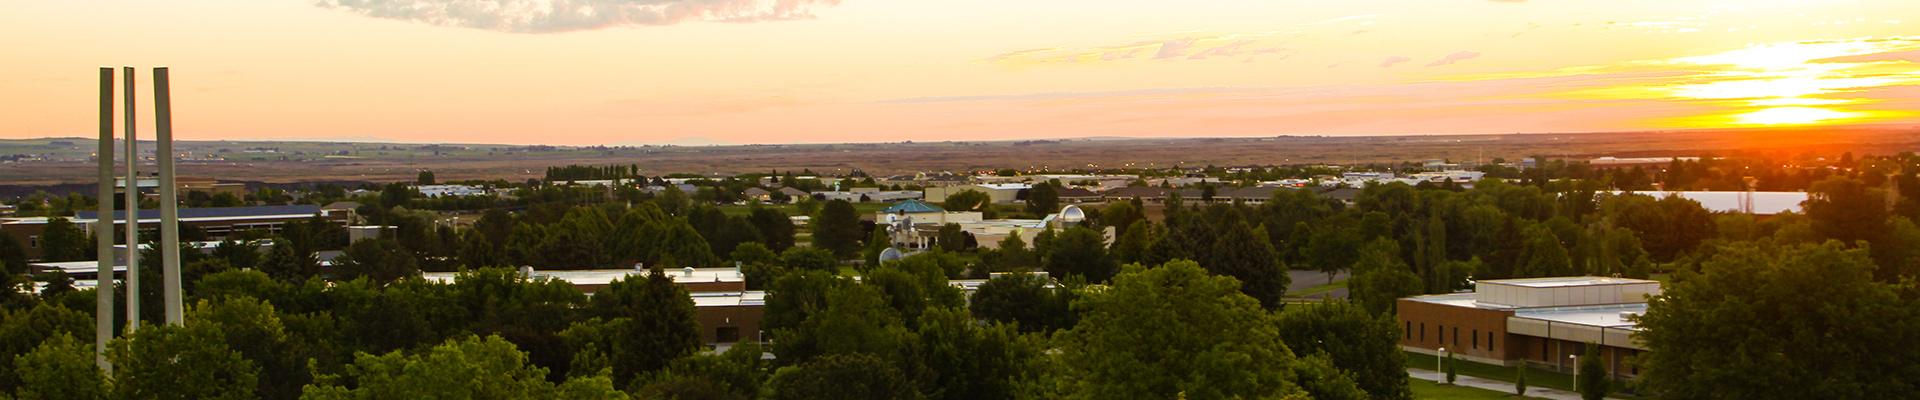 aerial image of campus at sunset